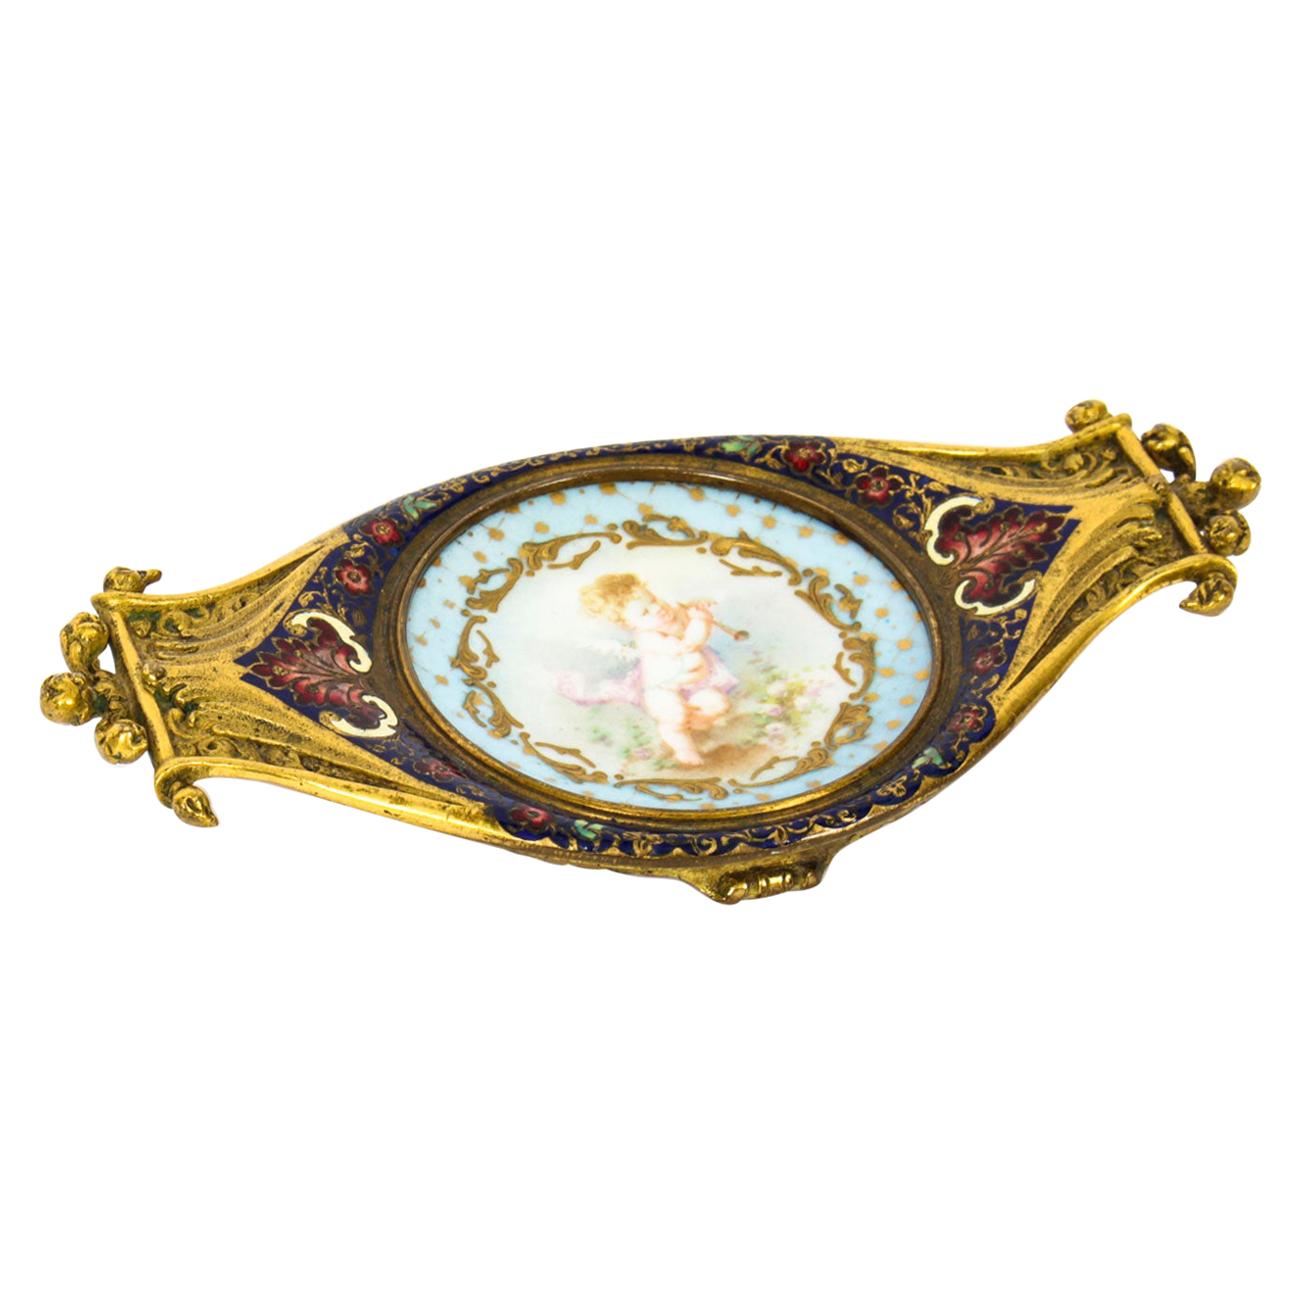 Antique French Ormolu and Champlevé Enamel Pin Tray, 19th Century